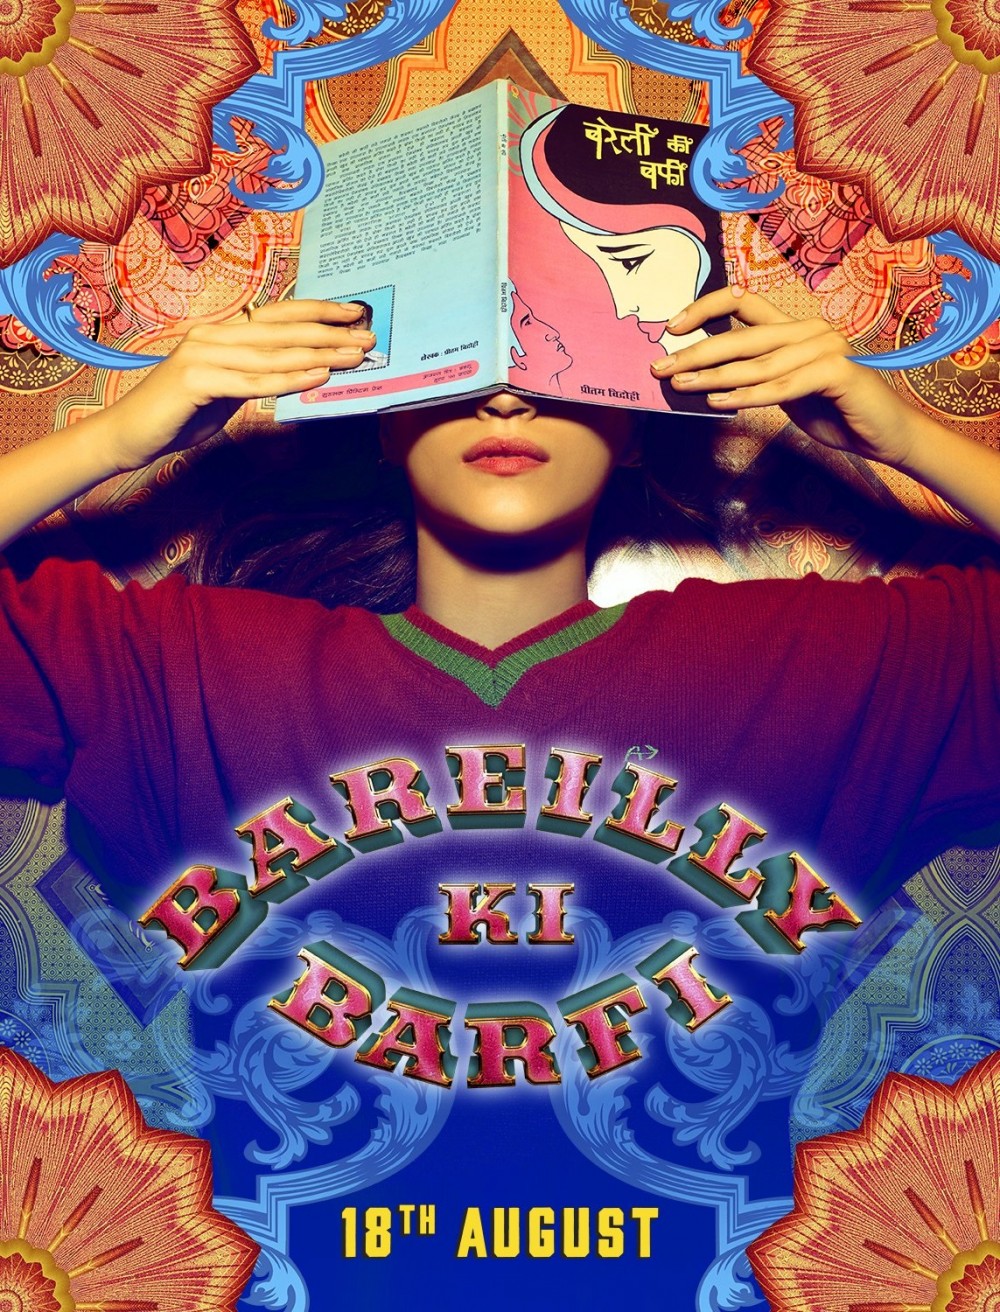 First look of ‘Bareilly Ki Barfi’ is out